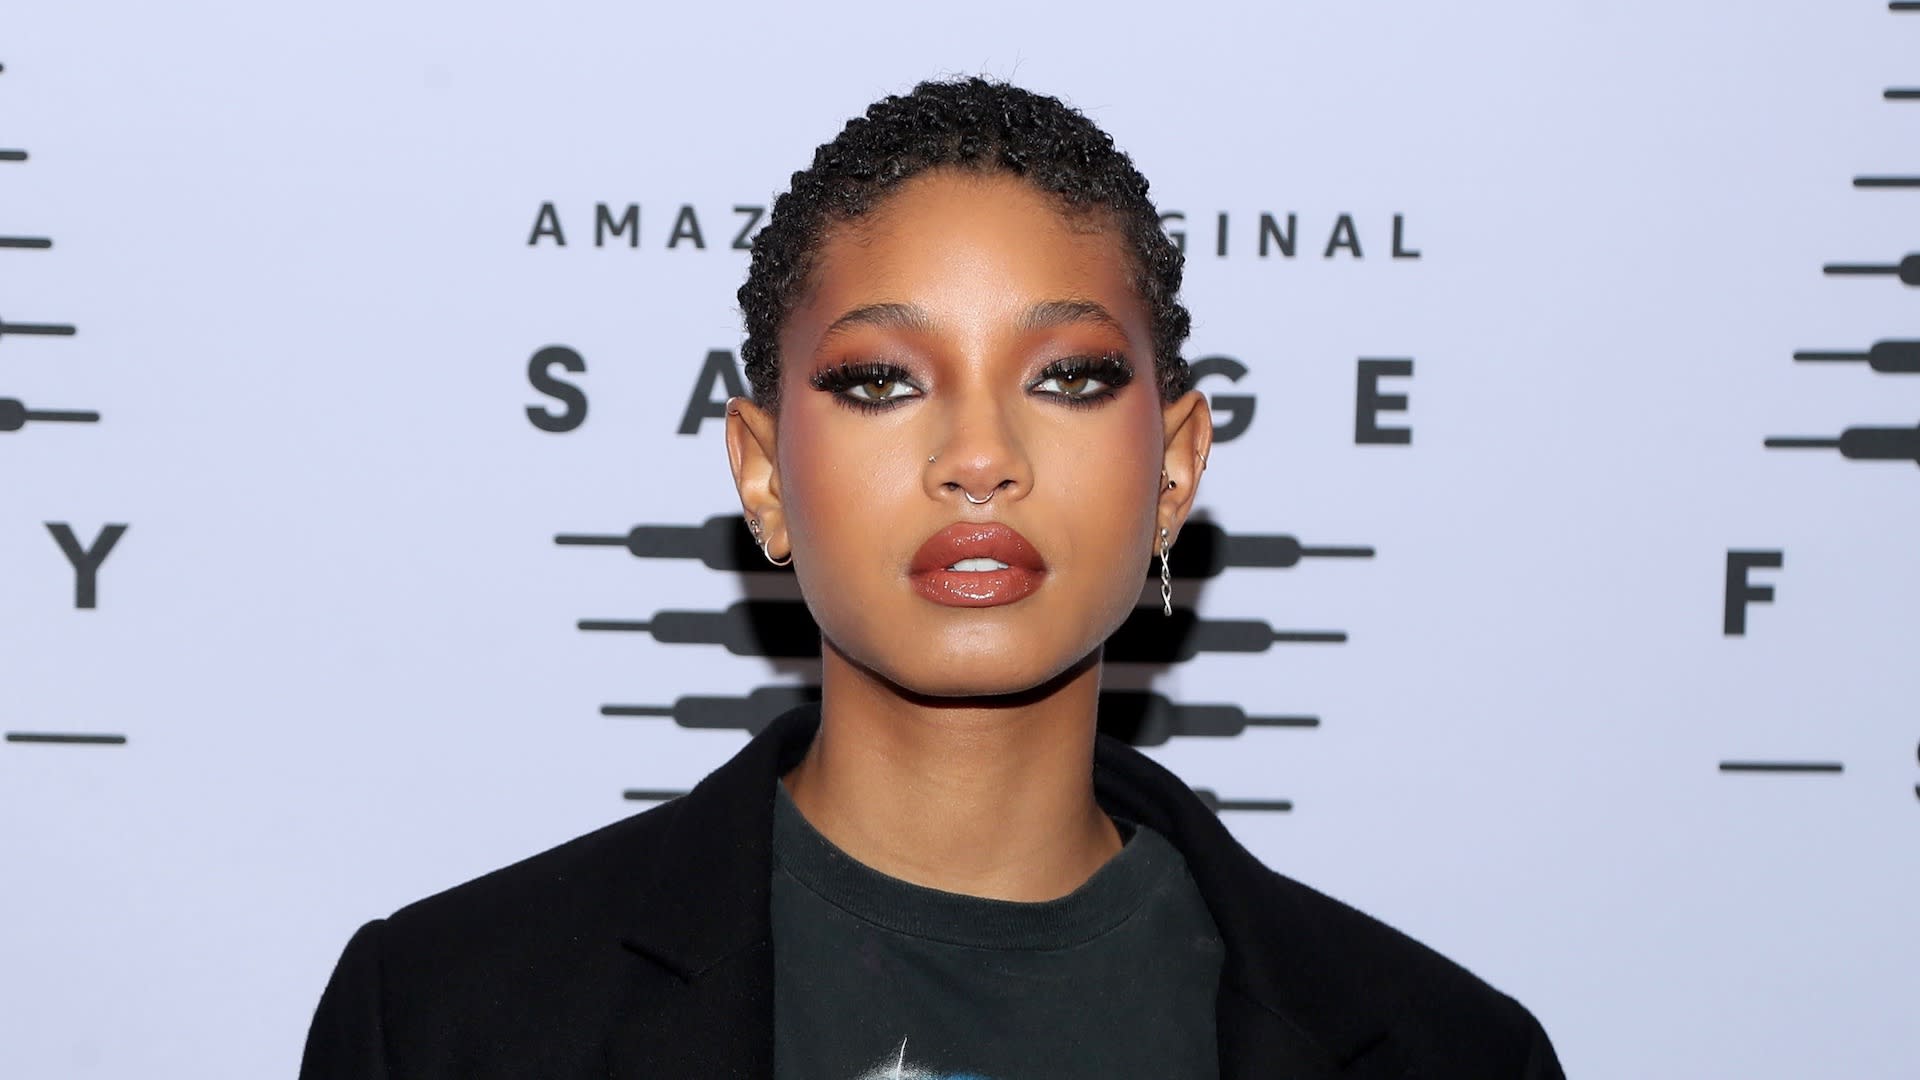 Willow Smith gets protection order against convicted sex offender